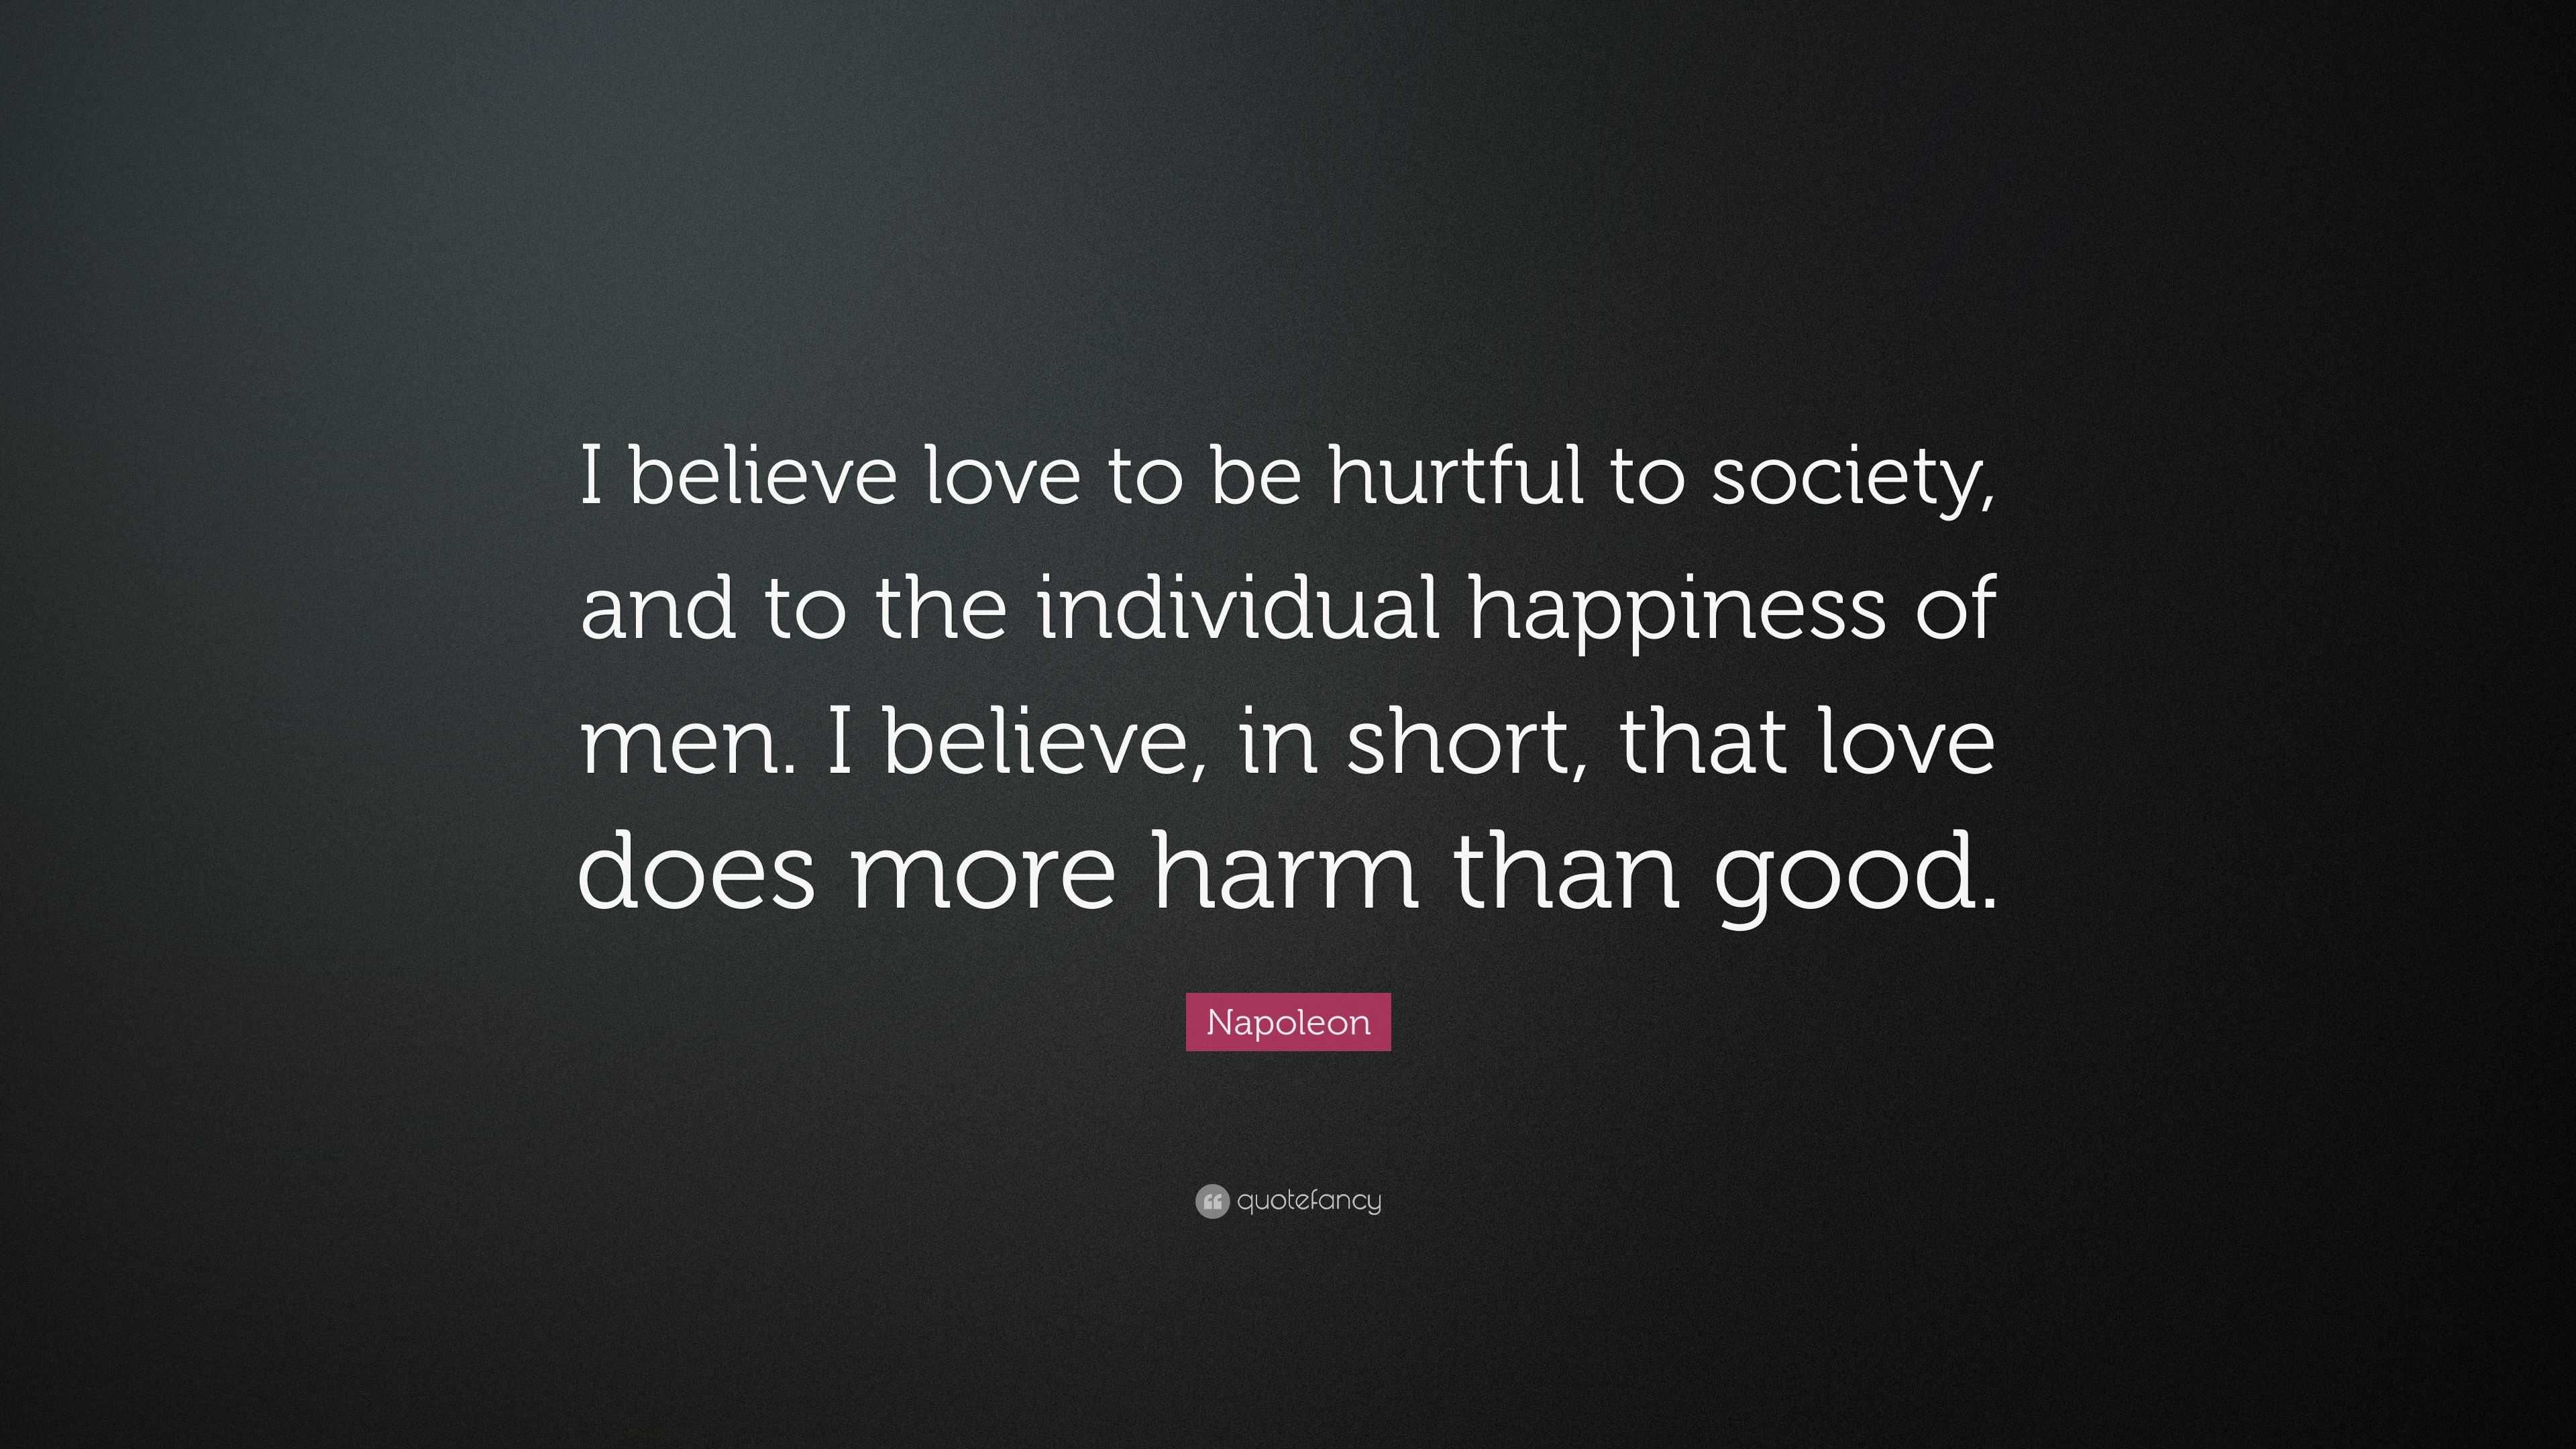 Napoleon Quote “I believe love to be hurtful to society and to the